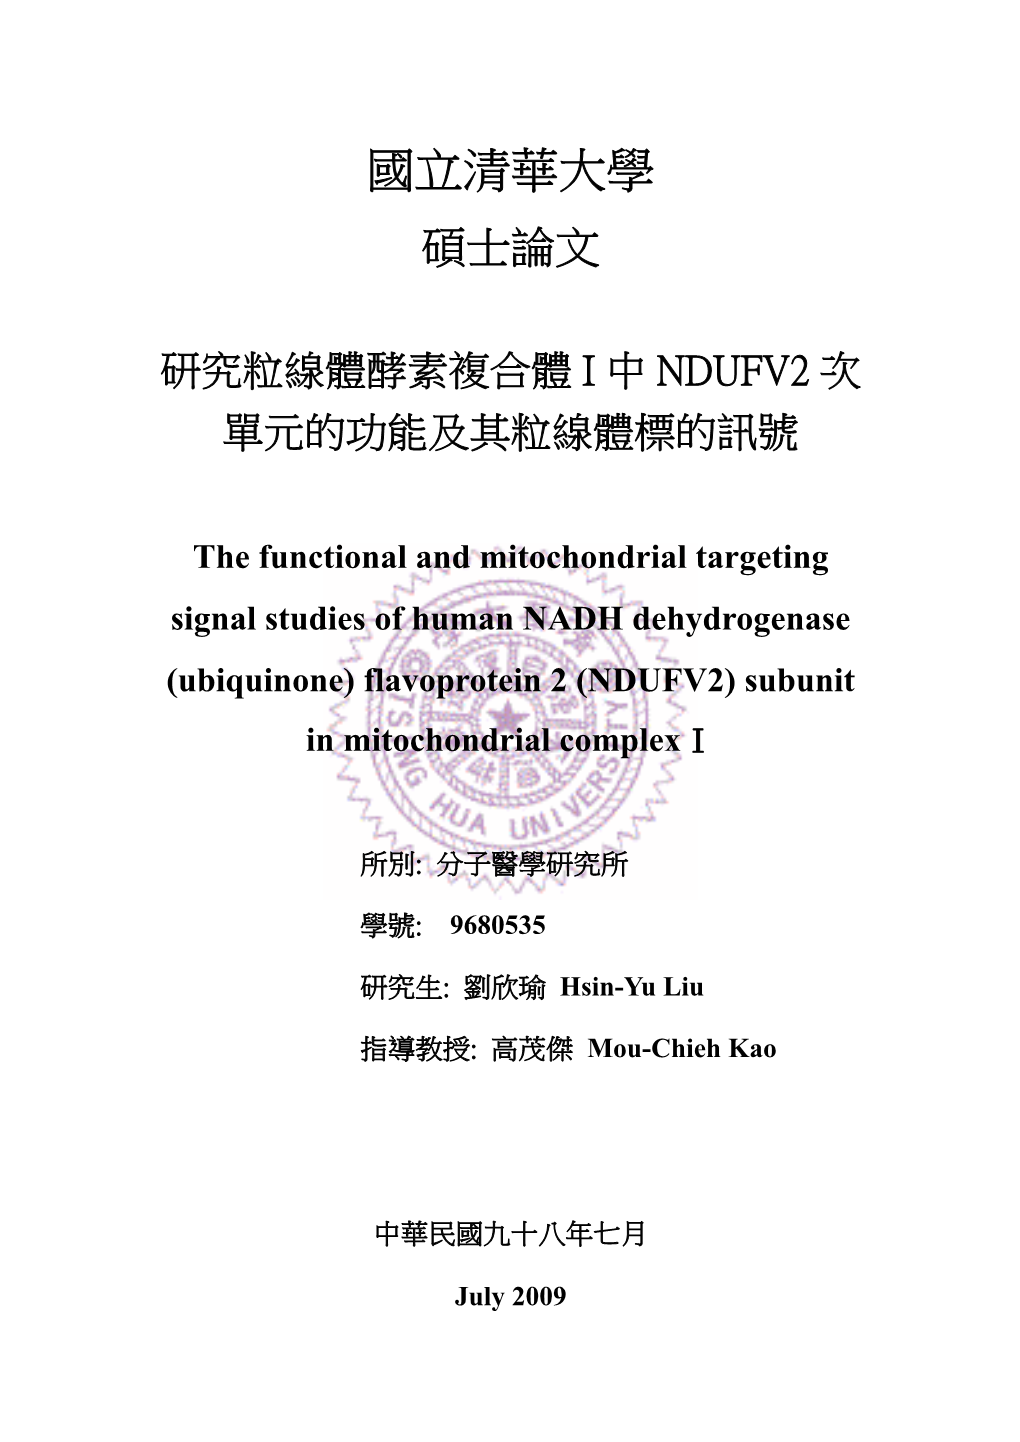 The Mitochondrial Targeting Signal and Functional Studies of Human NADH Dehydrogenase (Ubiquinone) Flavoprotein 2 (NDUFV2) Subun